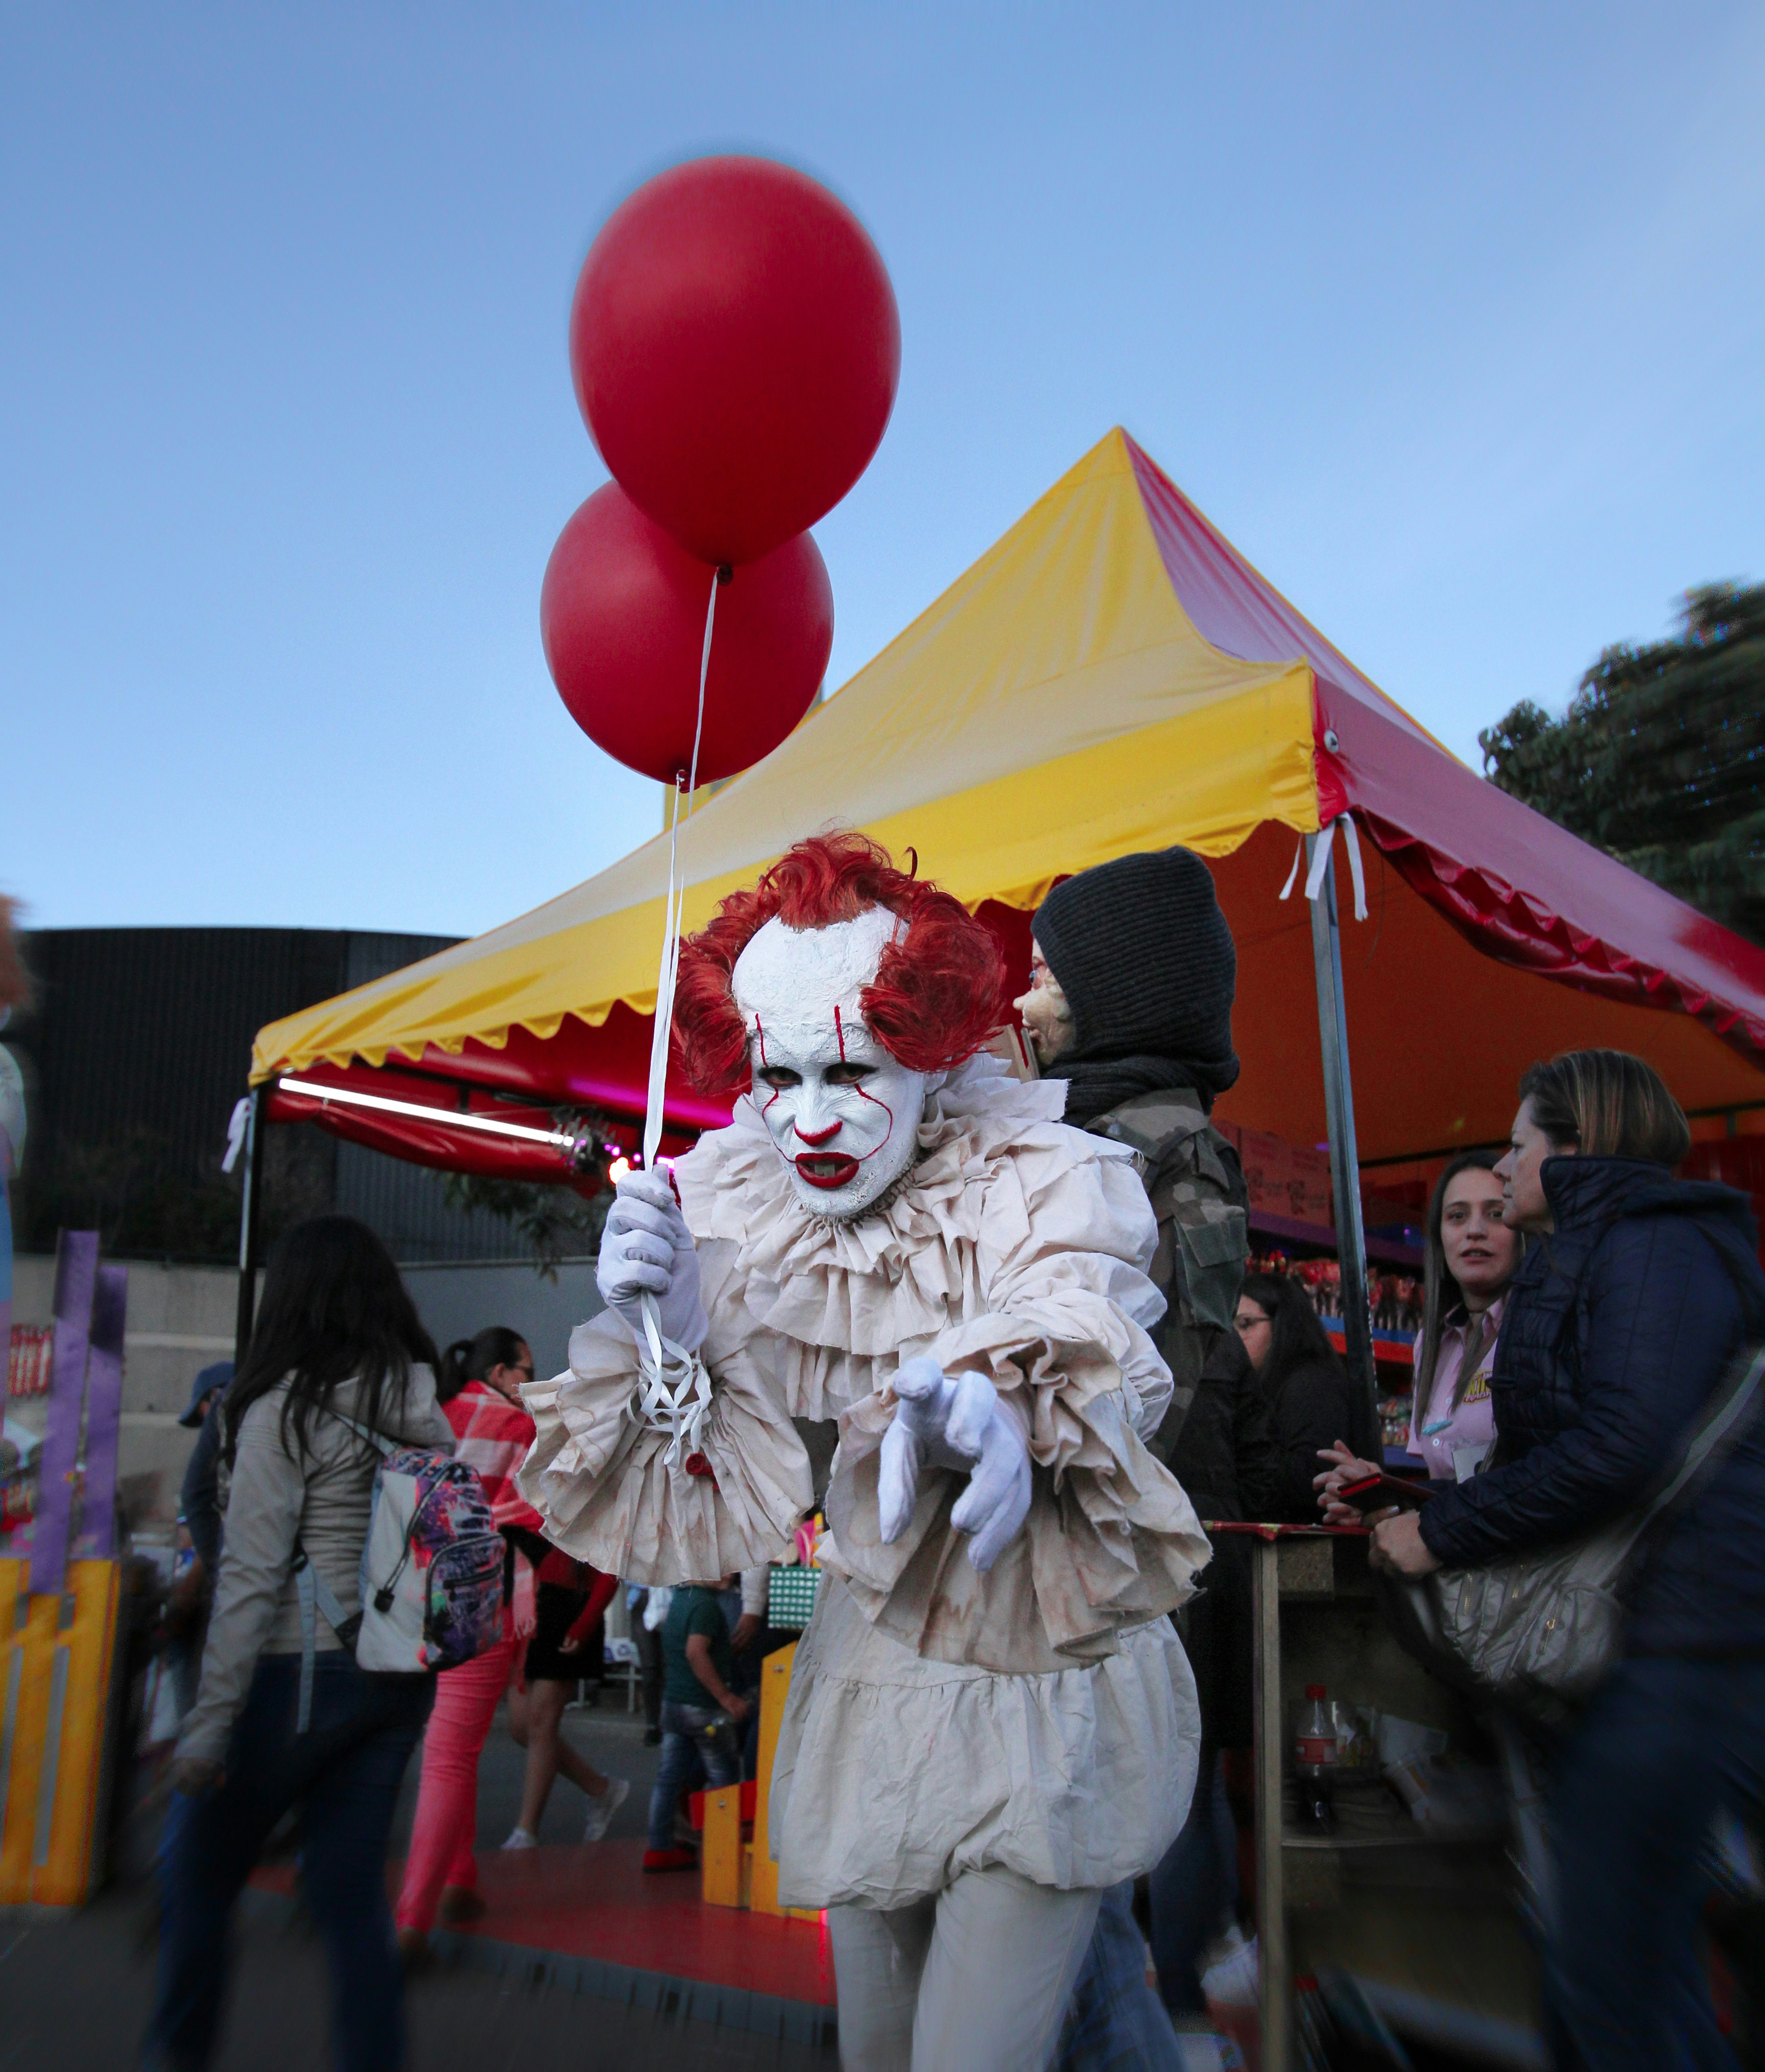 clown holding two red balloons